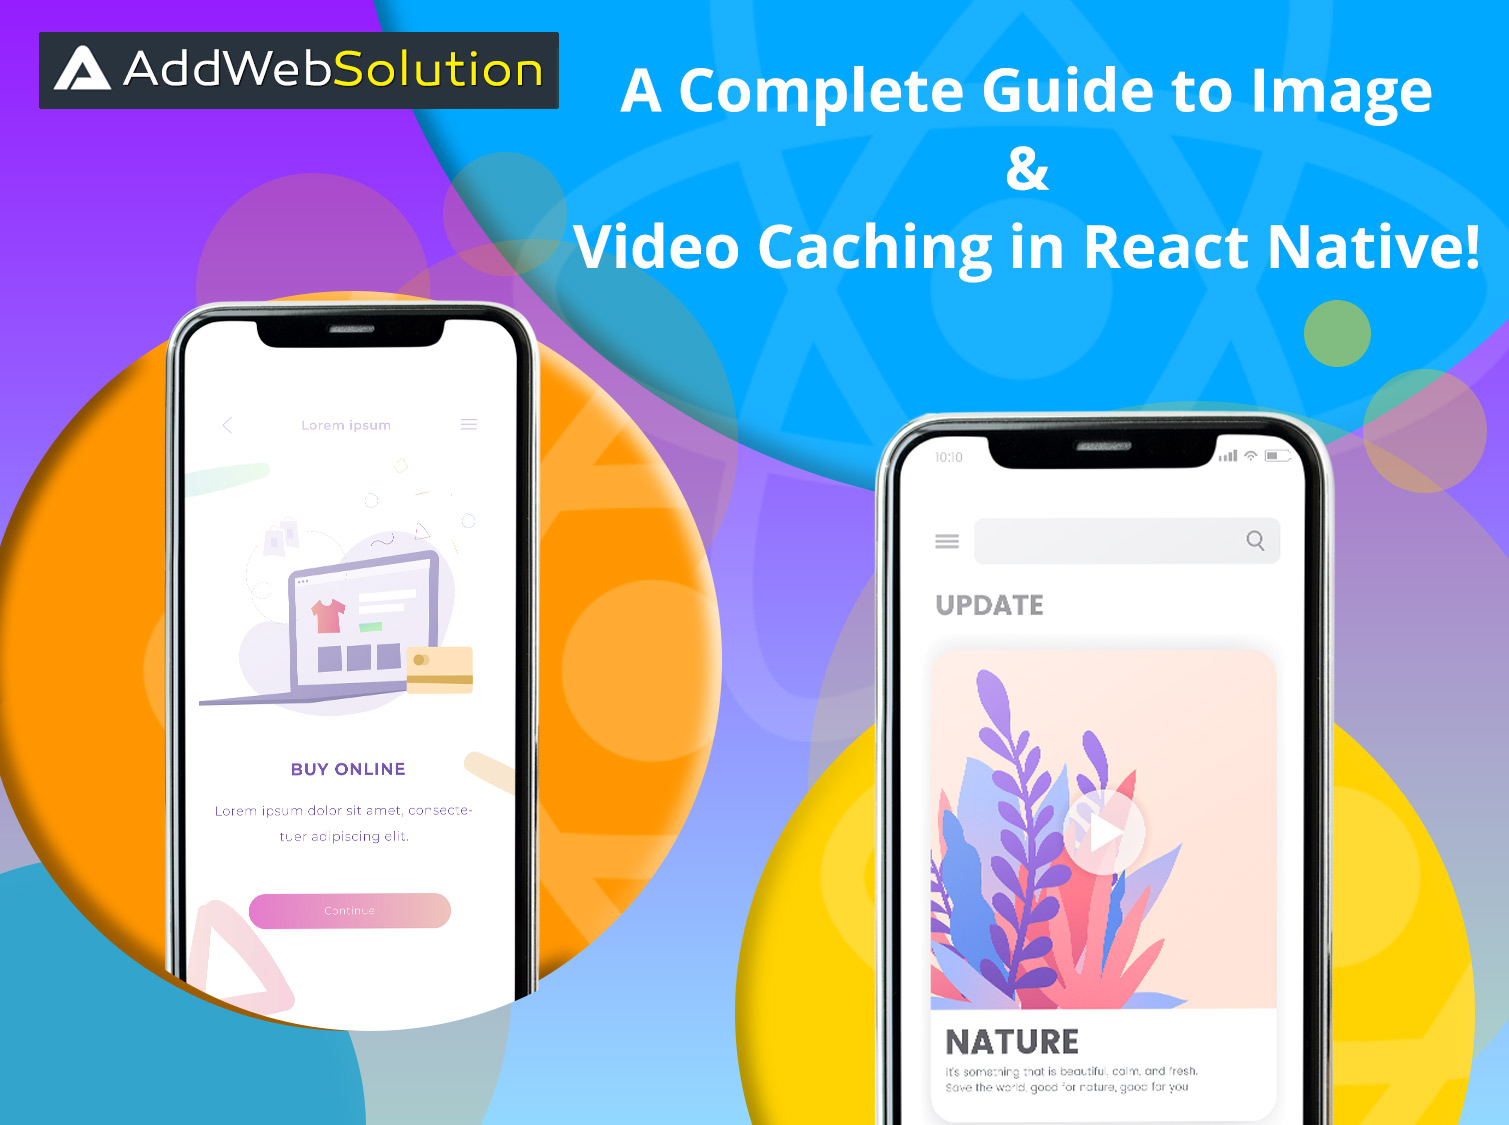 A Complete Guide To Image & Video Caching In React Native